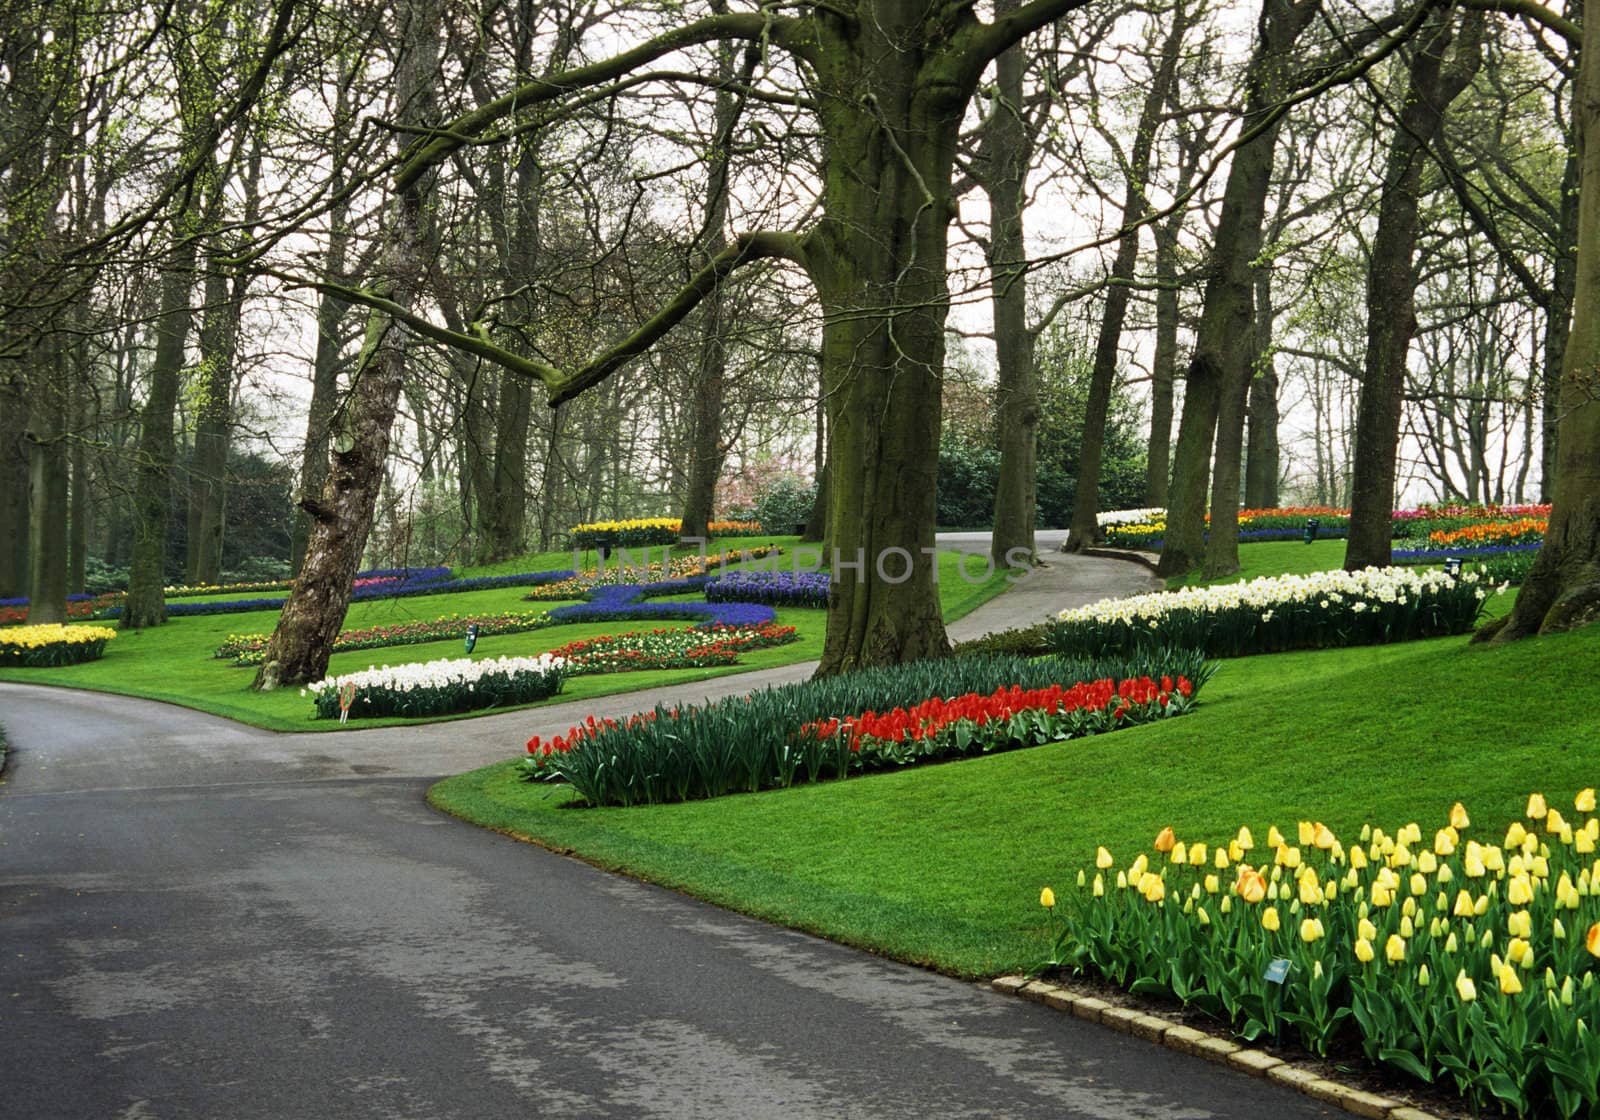 Pathways lead visitors past thousands of hyacinths and tulips  in the spring in Keukenhof Gardens, Lisse, The Netherlands.